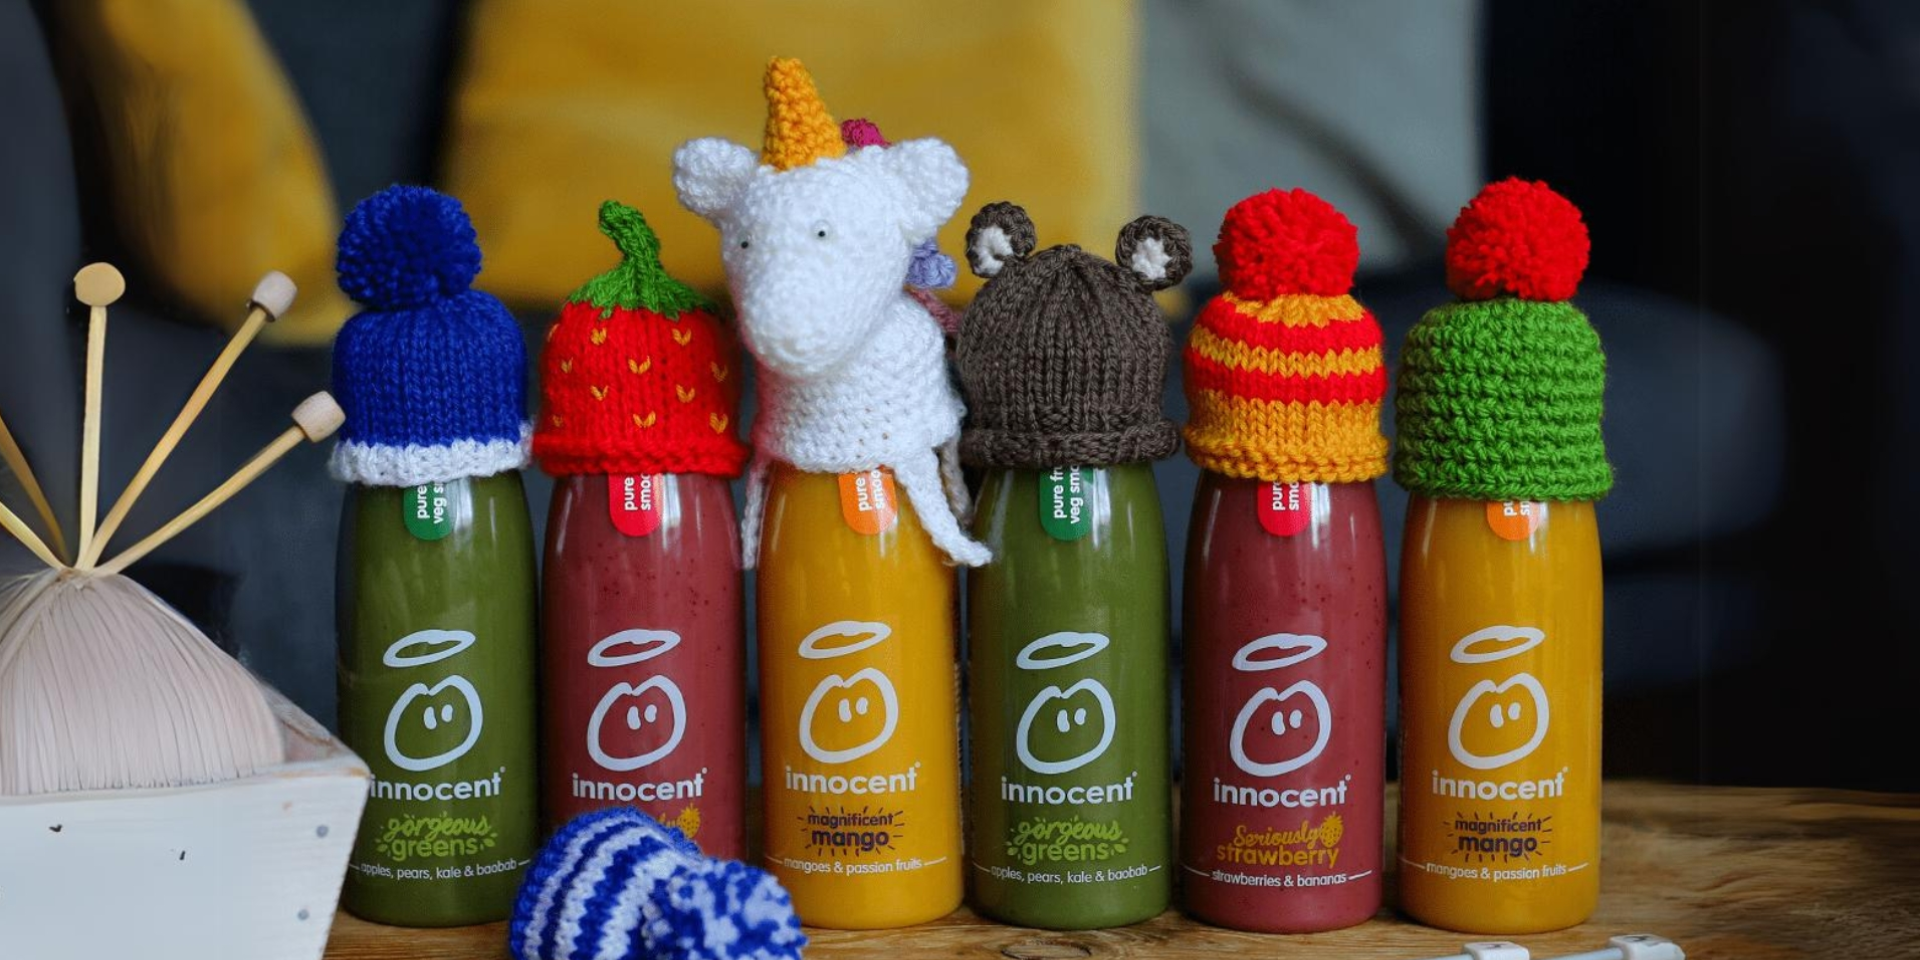 6 smoothie bottles wearing small knitted hats stood on a table. 